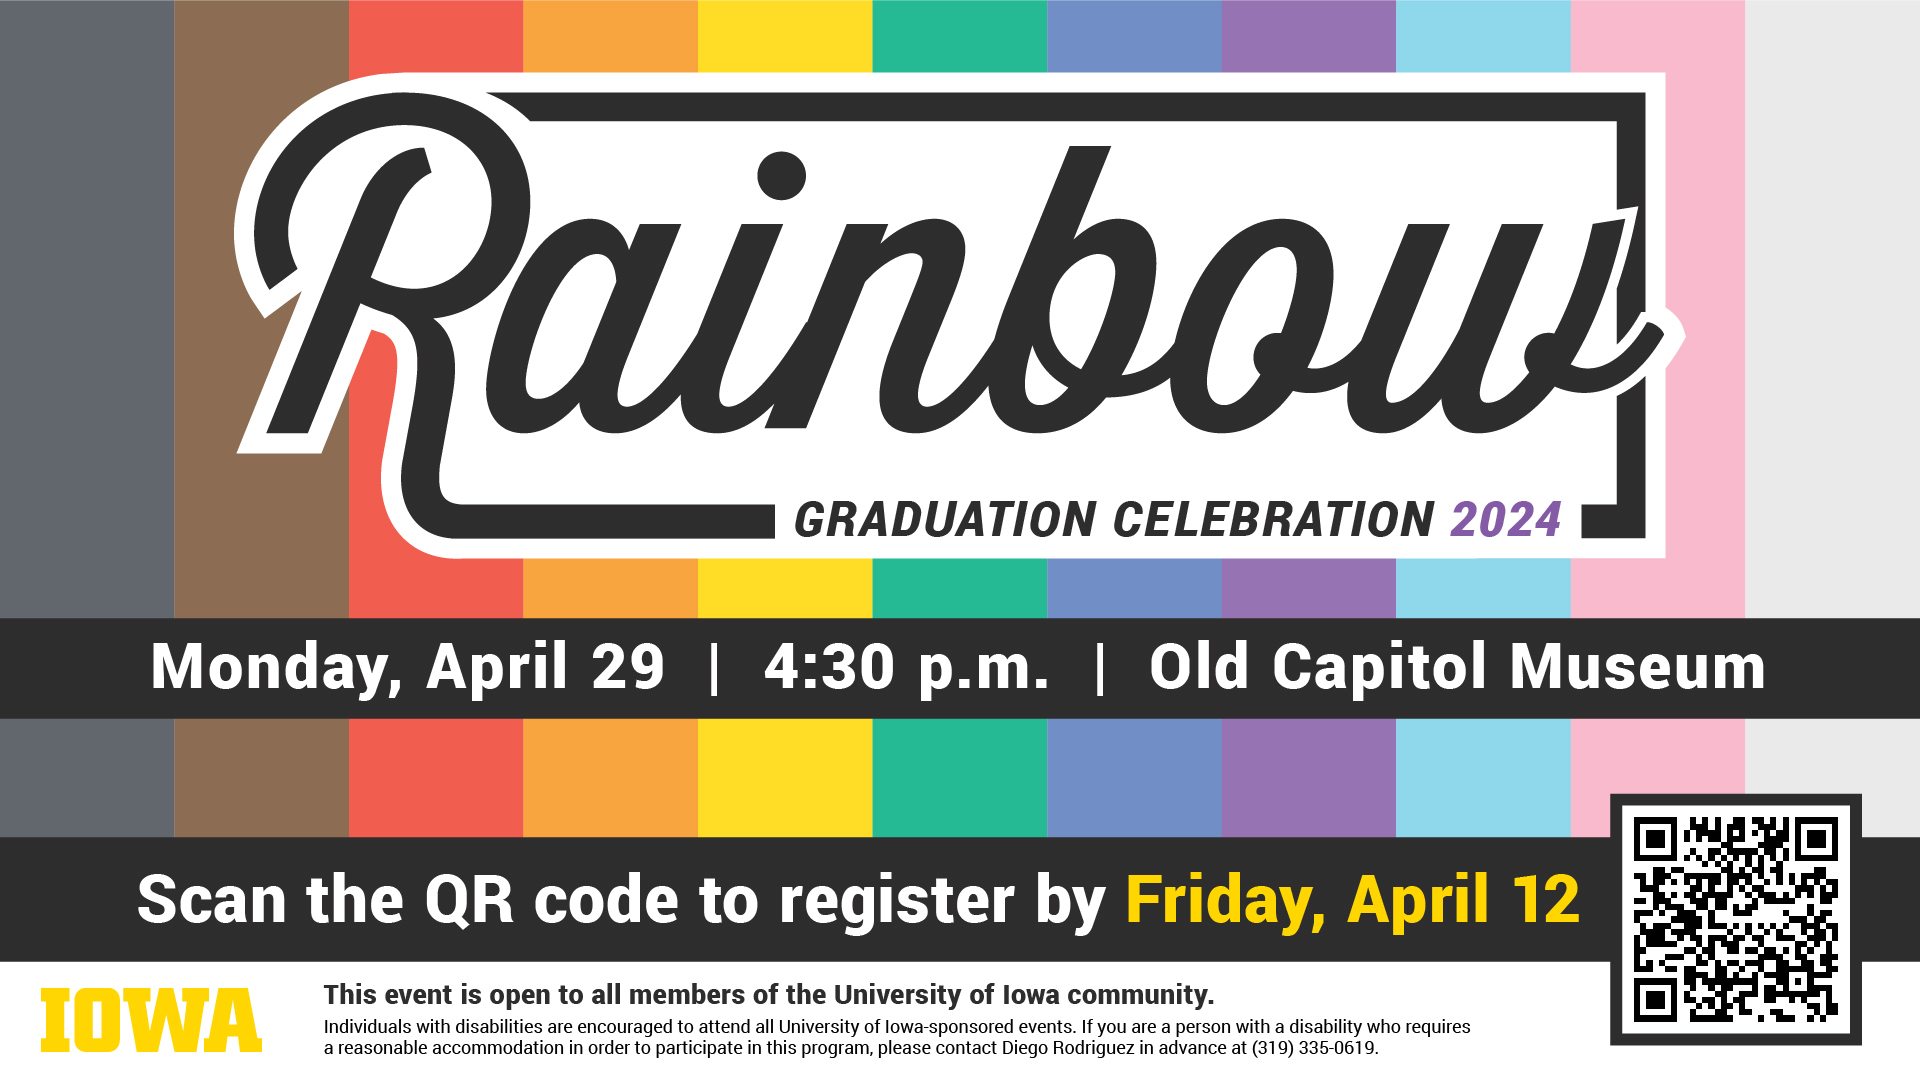 Rainbow Graduation Celebration 2024  Date: Monday, April 29 Time: 4:30 p.m. Location: Old Capital Senate Chambers (21 N Clinton St)  footer content: This event is open to all members of the University of Iowa community. Individuals with disabilities are encouraged to attend all University of Iowa-sponsored events. If you are a person with a disability who requires a reasonable accommodation in order to participate in this program, please contact (insert: the sponsoring department or contact person) in advance at (insert: telephone number).